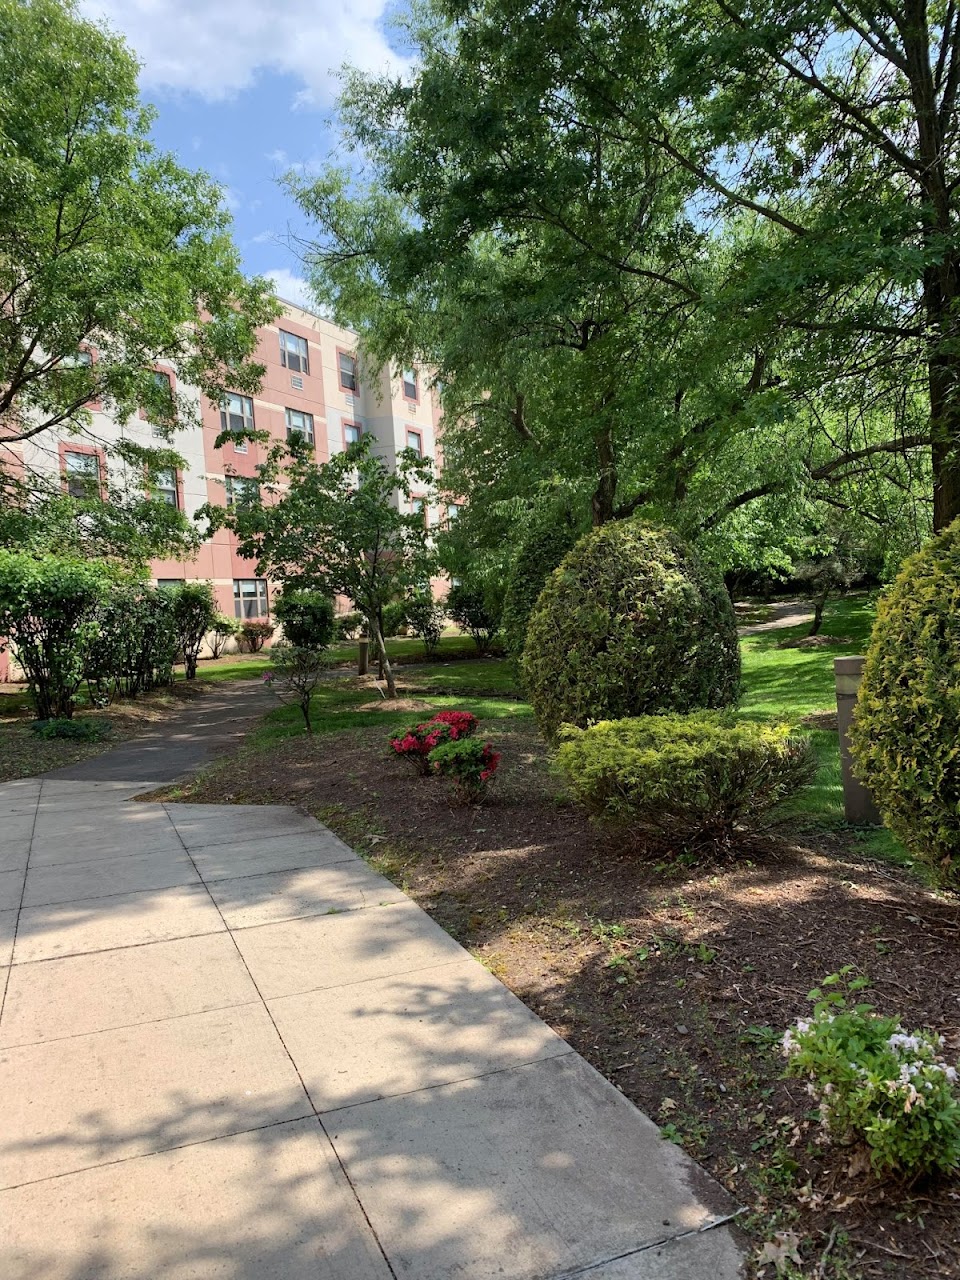 Photo of NORTH BRUNSWICK SENIOR HOUSING COMPLEX. Affordable housing located at 740 HERMANN ROAD NORTH BRUNSWICK TWP, NJ 08902